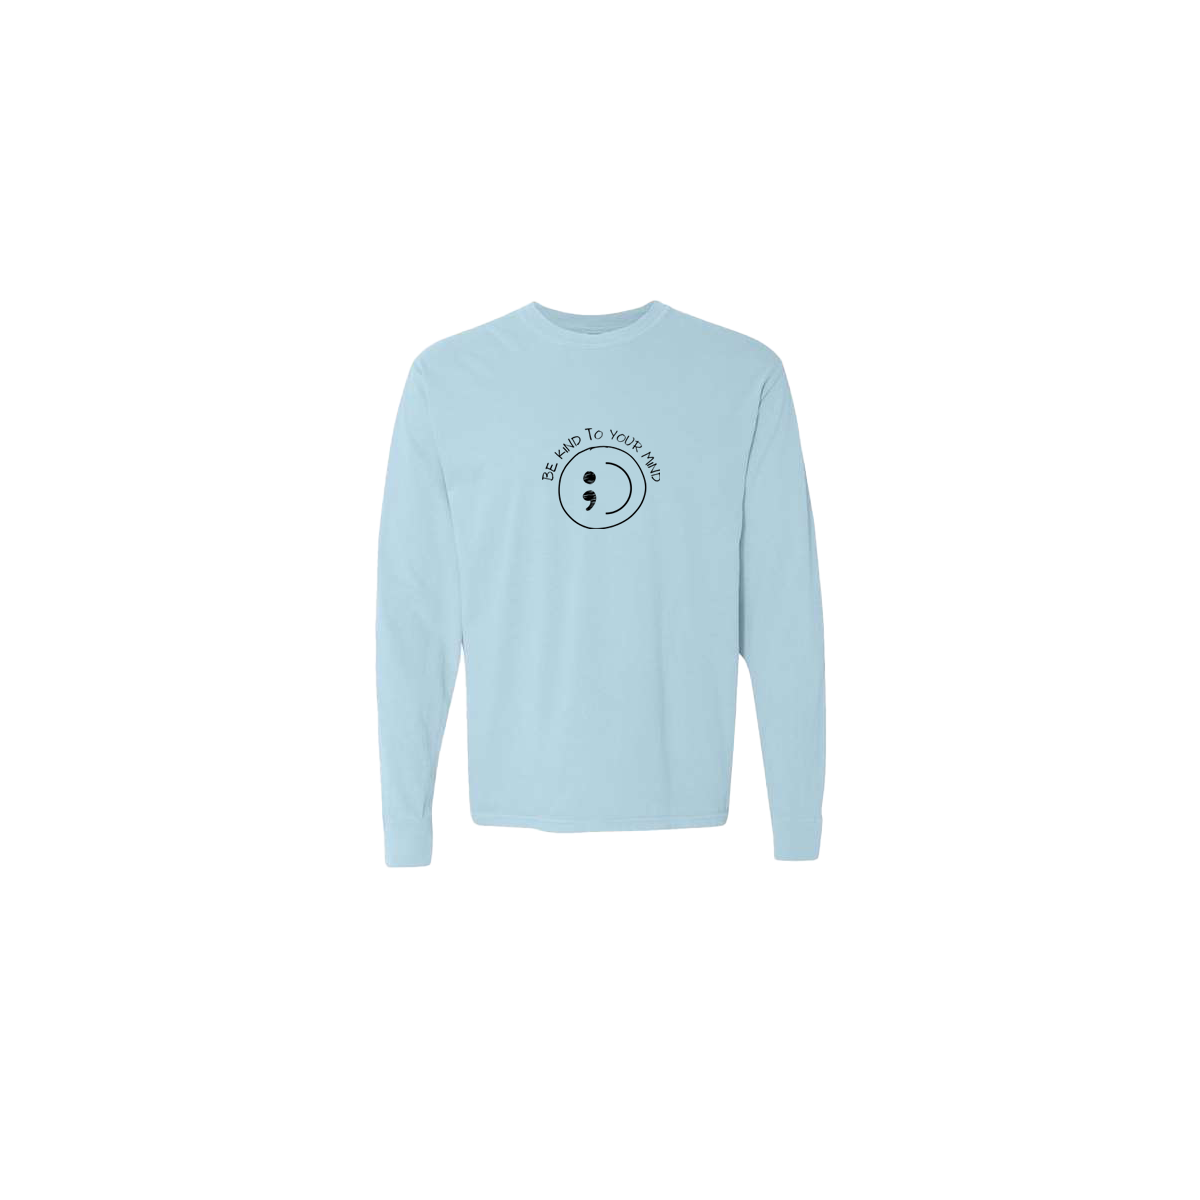 Be Kind To Your Mind Smiley Face Embroidered Light Blue Long Sleeve Tshirt - Mental Health Awareness Clothing